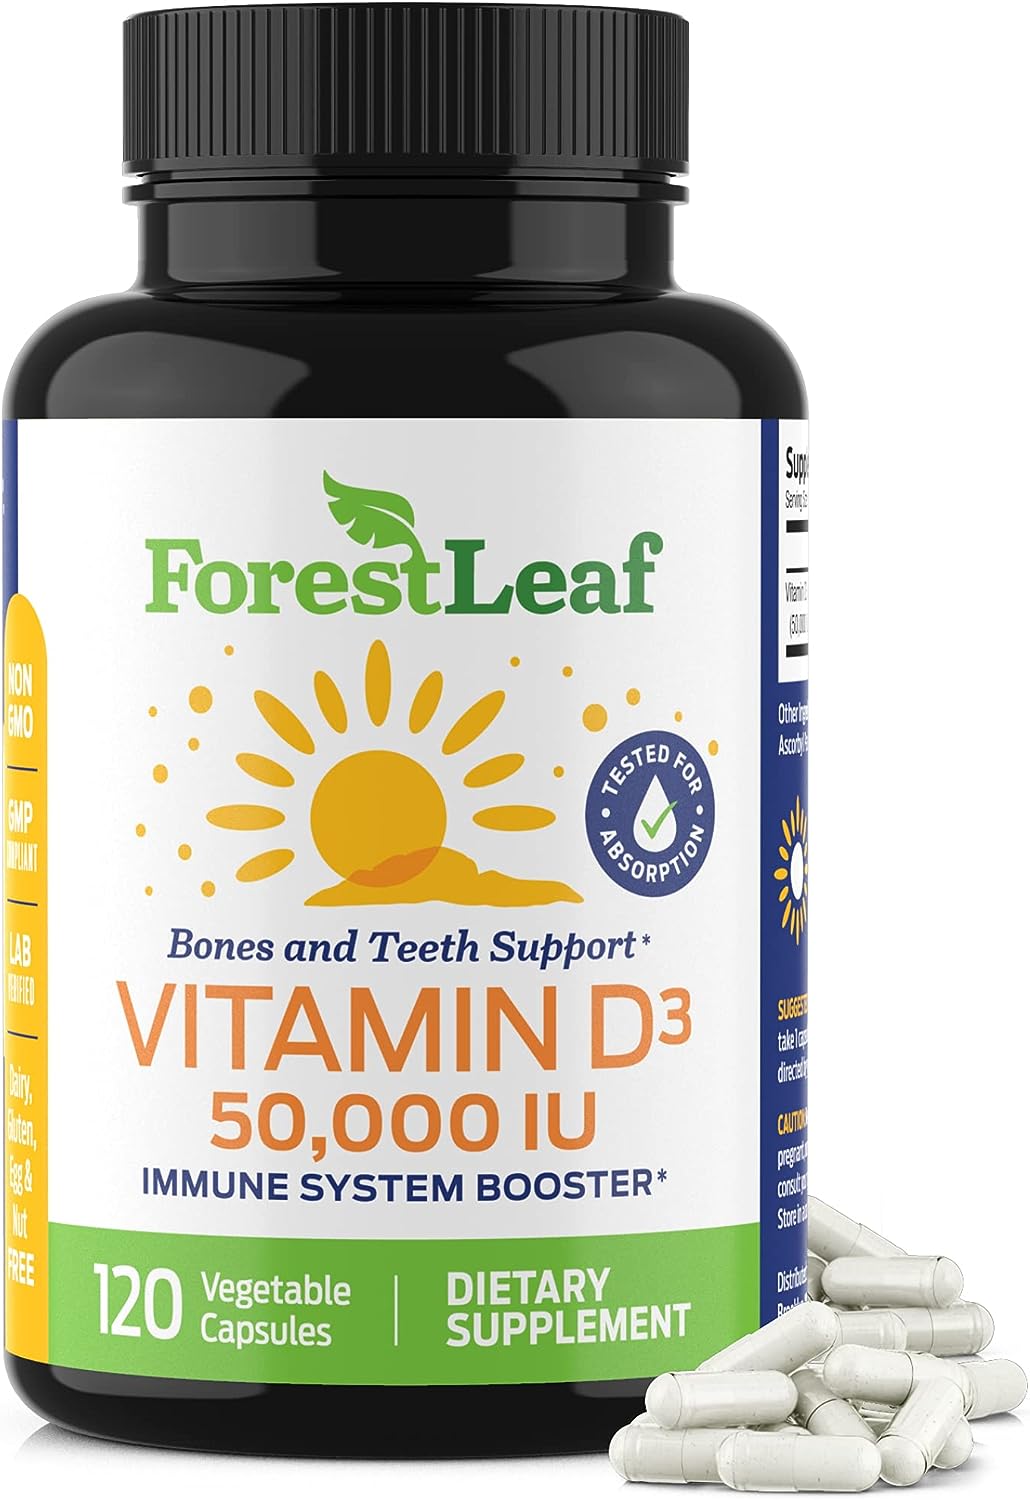 forestleaf vitamin d3 50000 iu weekly supplement 120 vegetable d capsules for bones teeth and immune support easy swallo 4